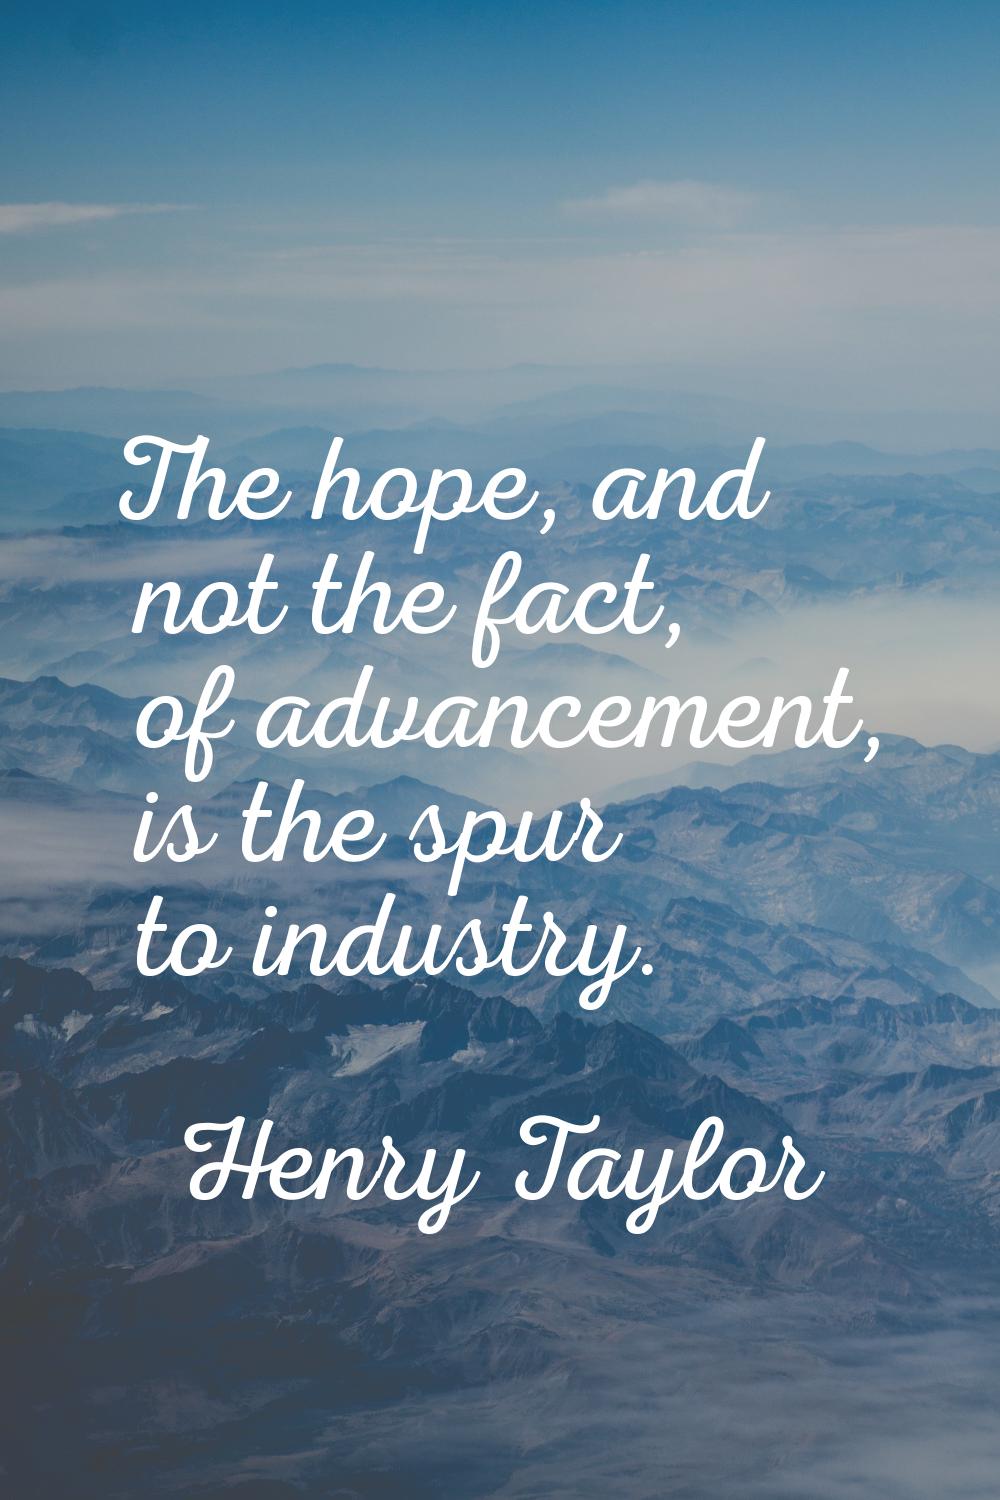 The hope, and not the fact, of advancement, is the spur to industry.